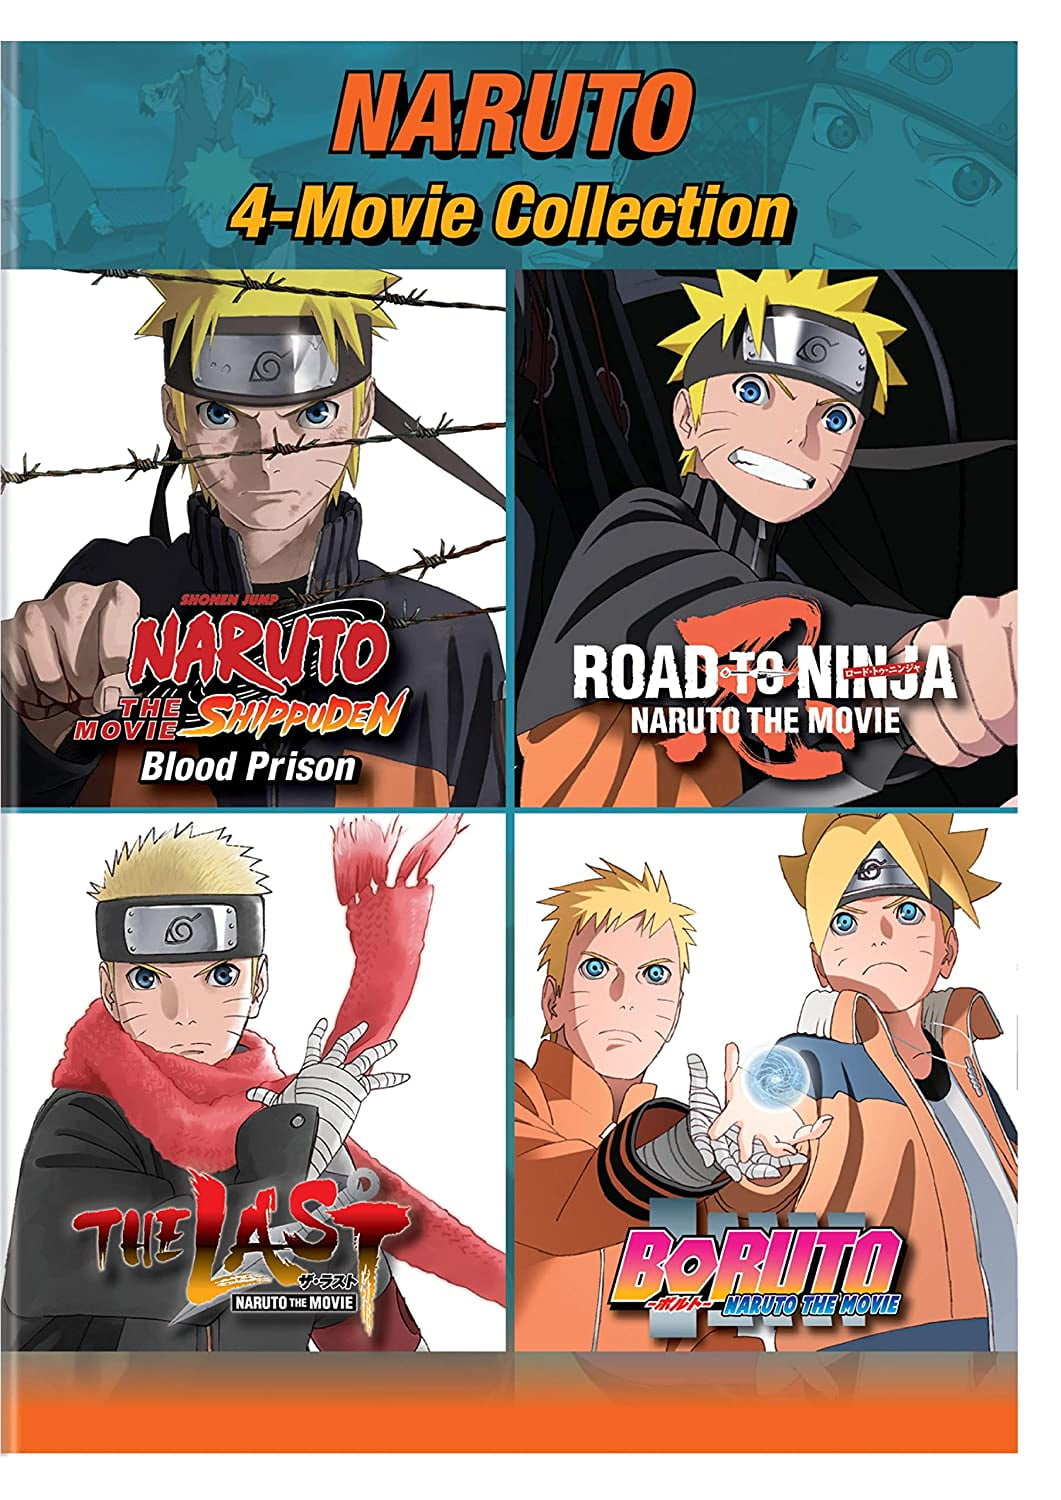 NARUTO The Movie Road To Ninja - Official Extended Trailer 